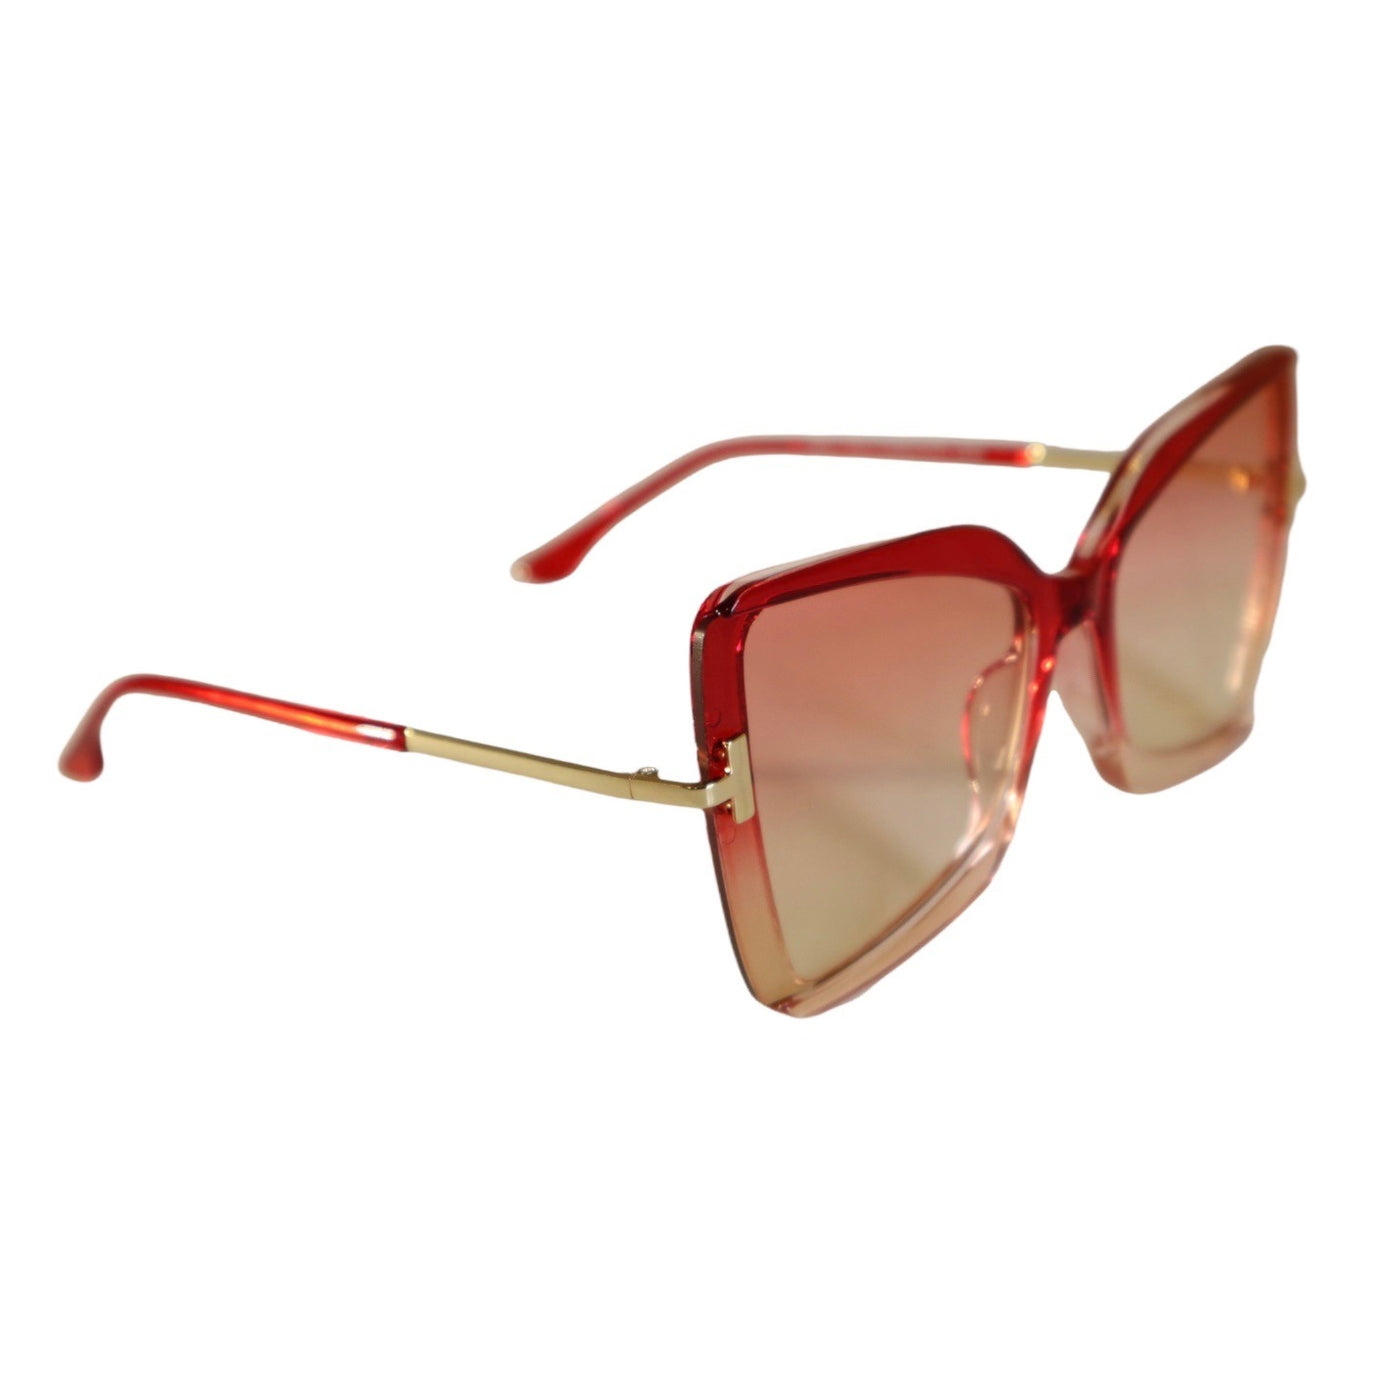 Out-n-About Semi Rimless Cateye Sunglasses with Red/Tan Gradient Lens and Frame